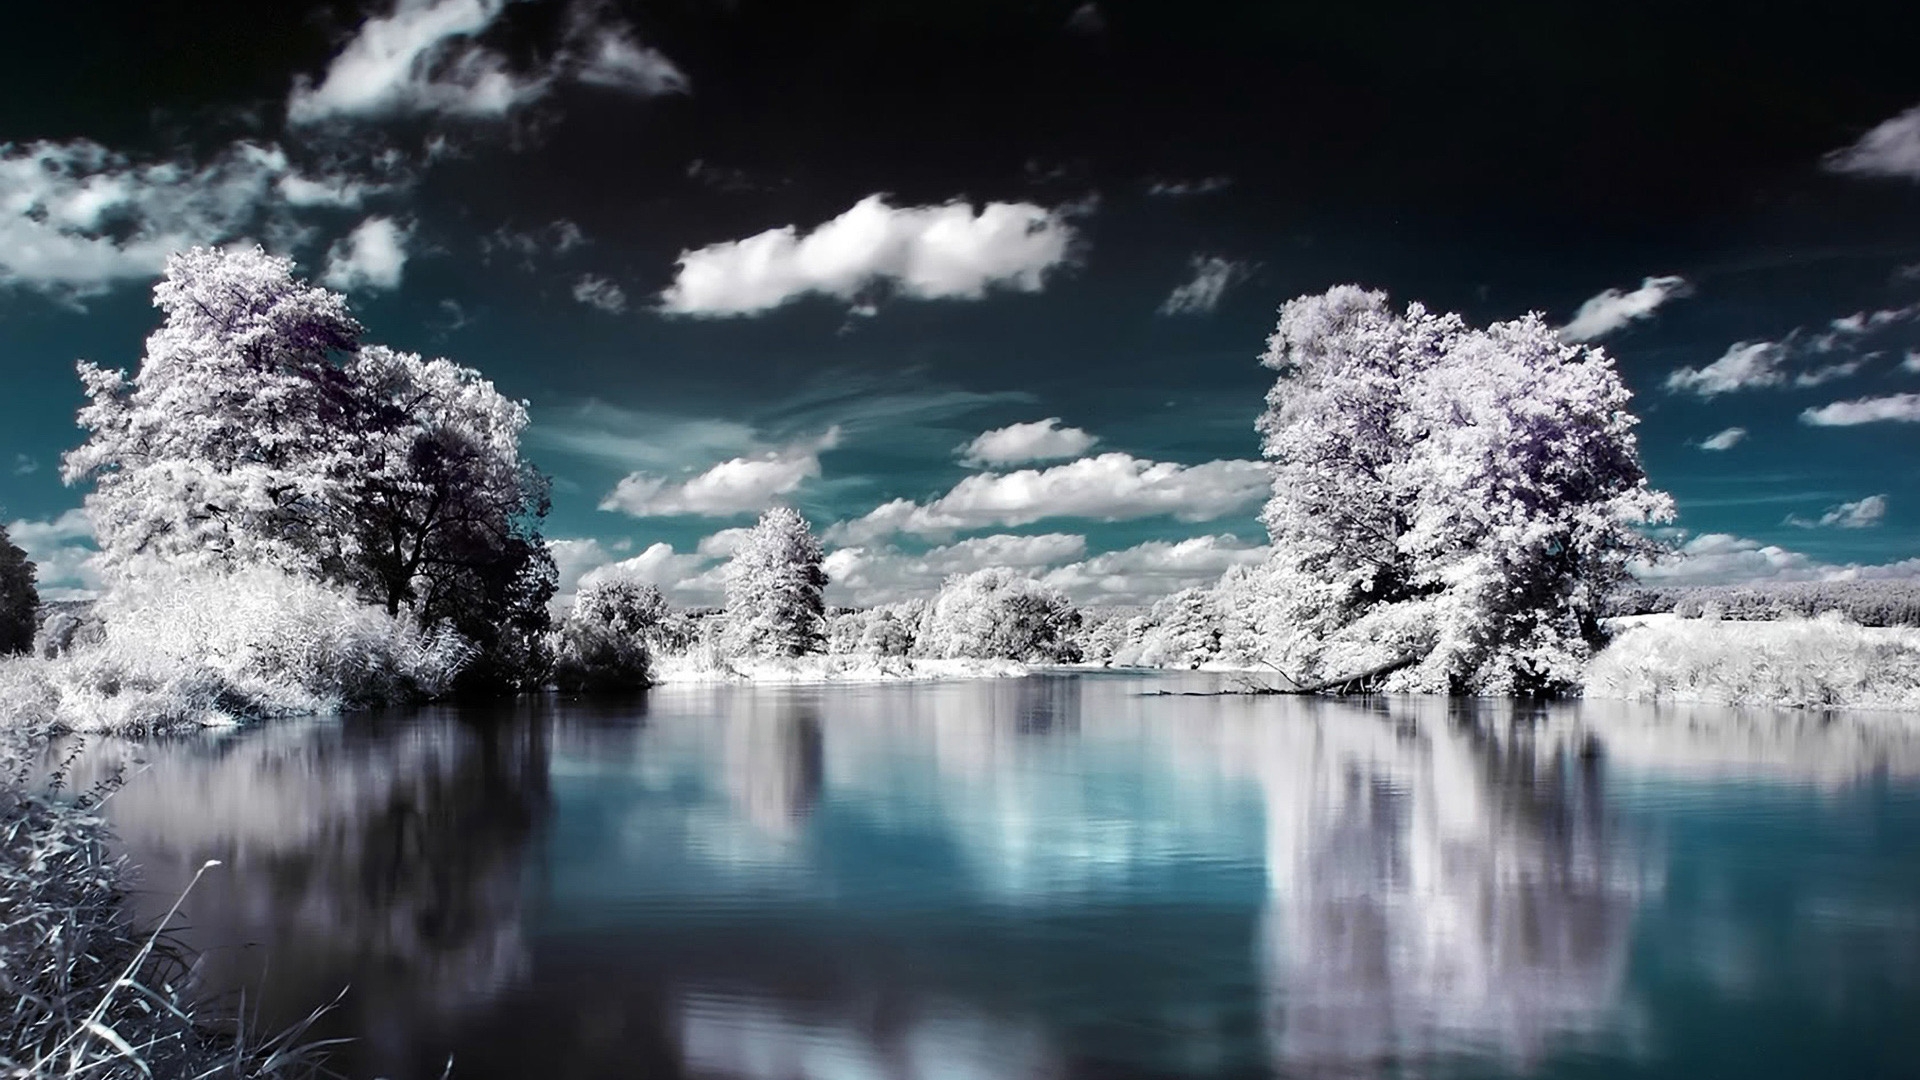 Superb Winter Lake View for 1920 x 1080 HDTV 1080p resolution